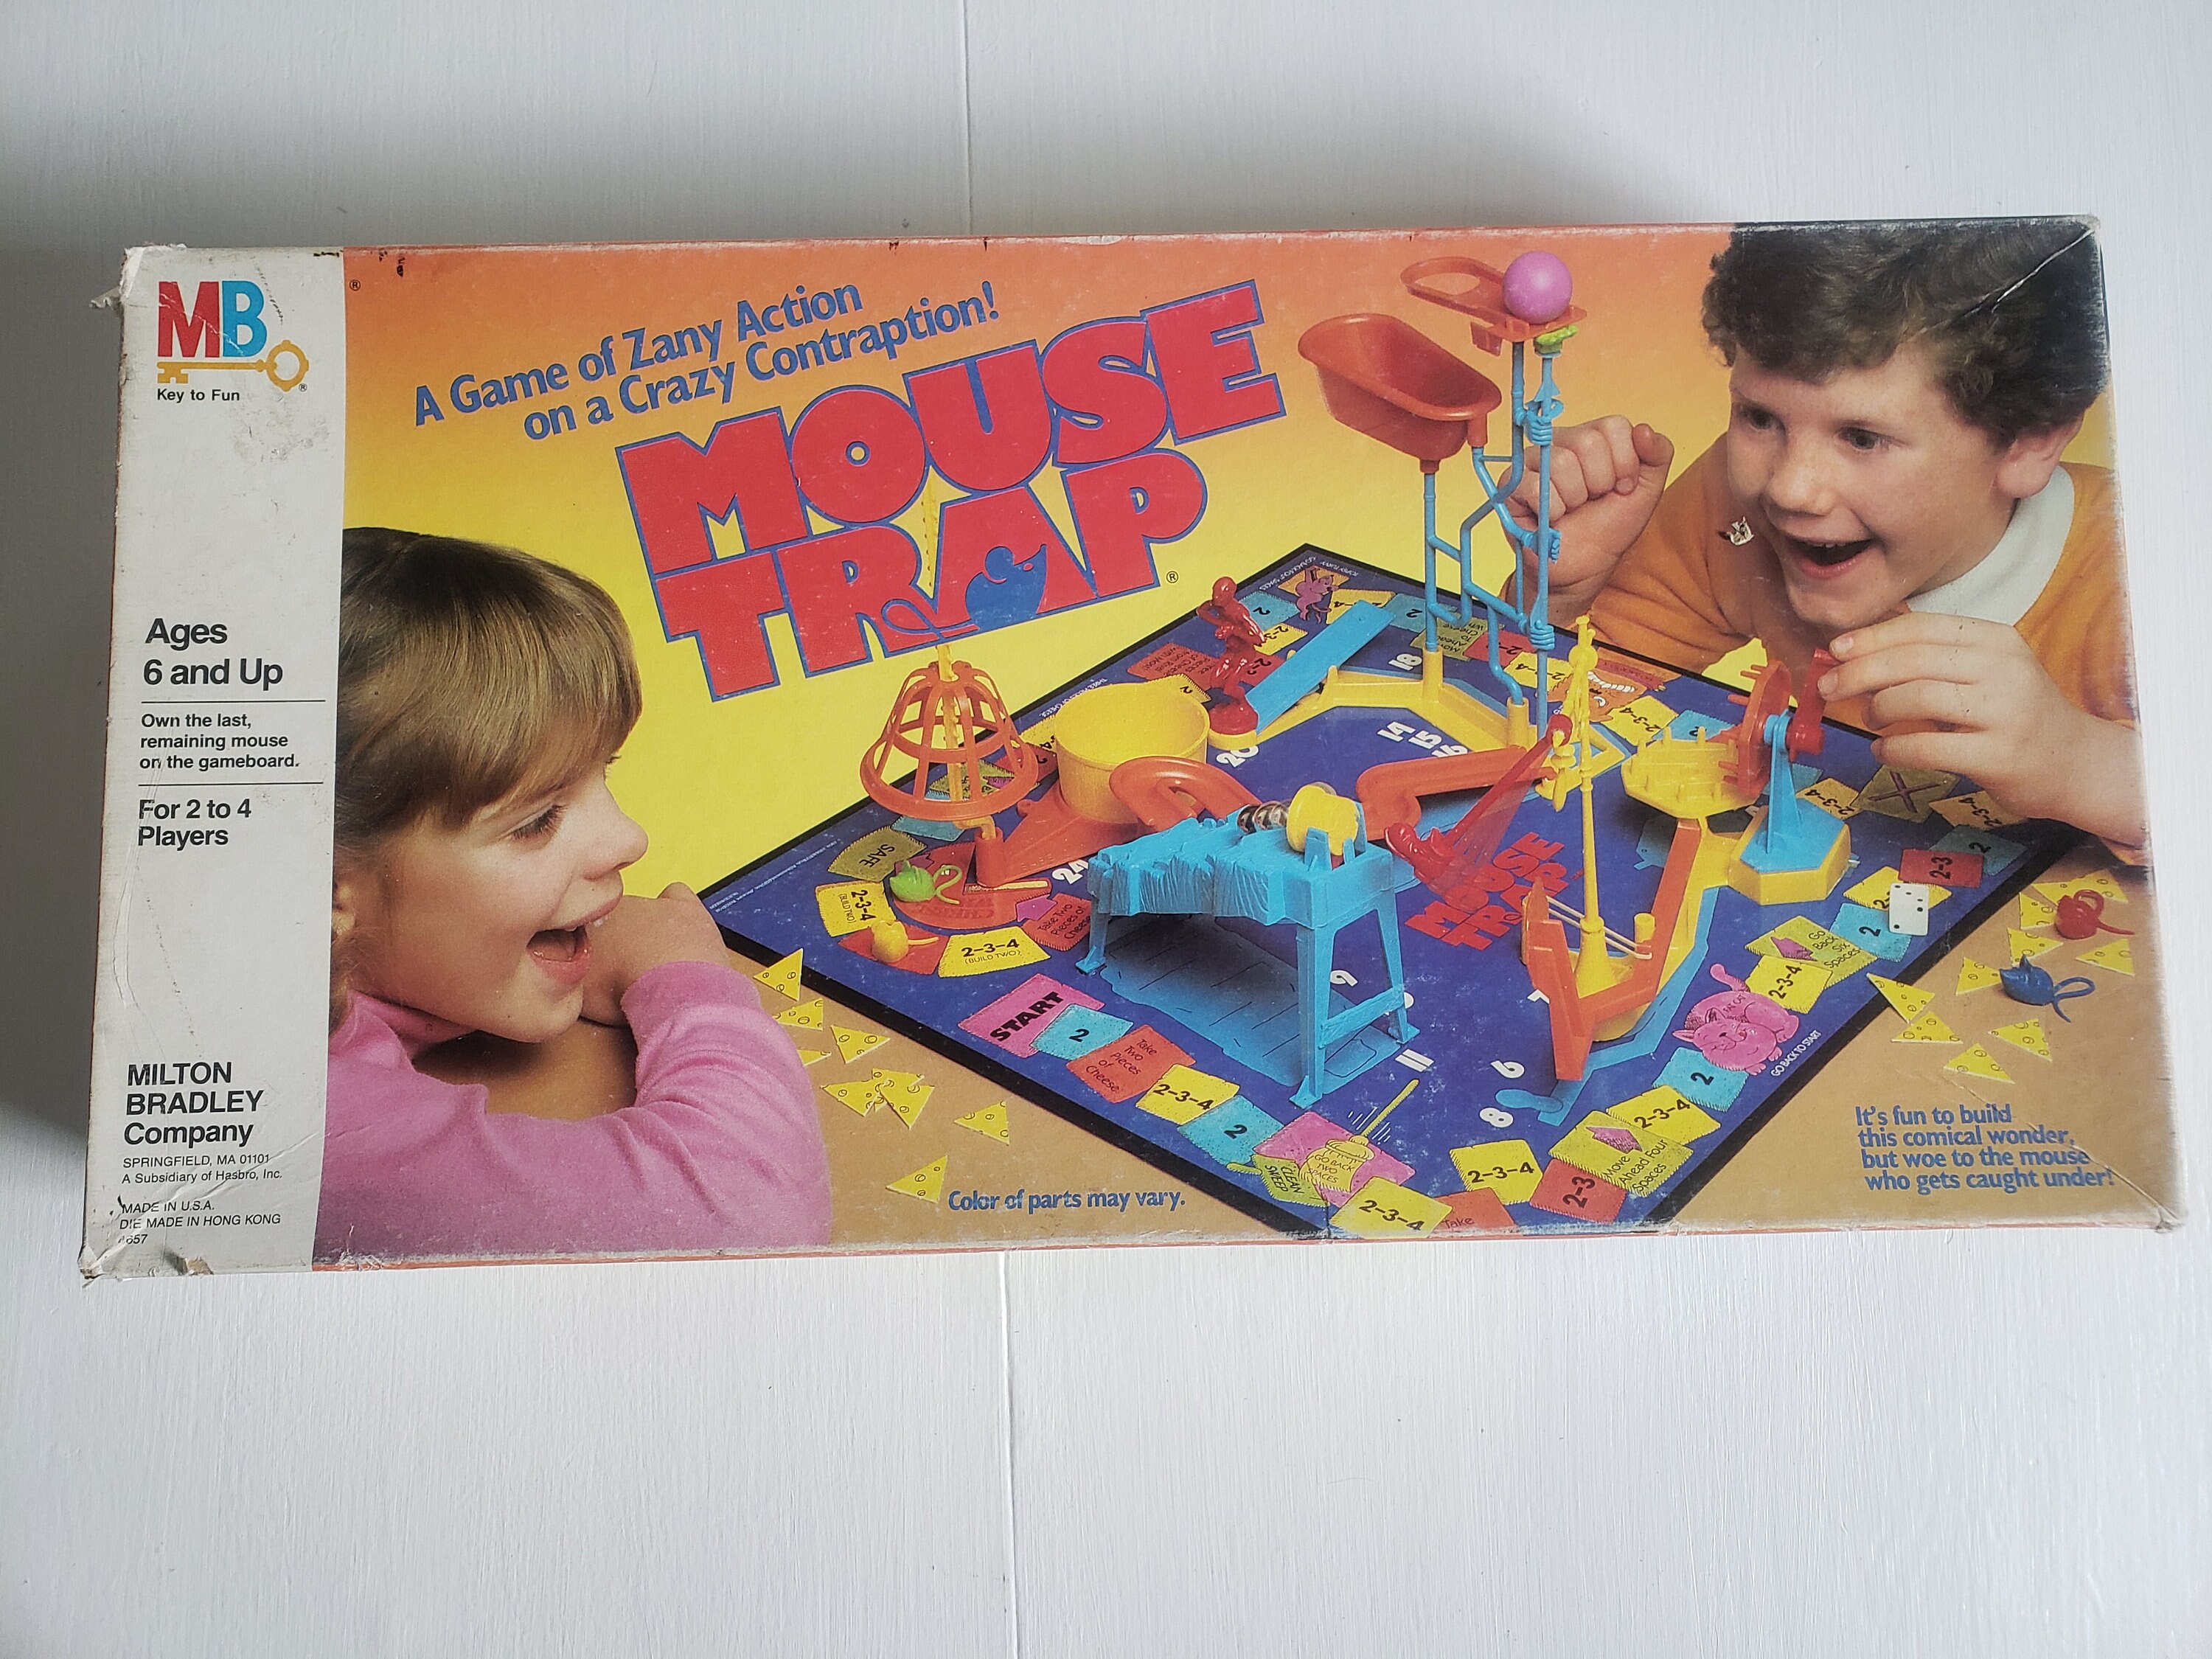 1990 Mouse Trap Board Game Commercial, board game, television advertisement,  song